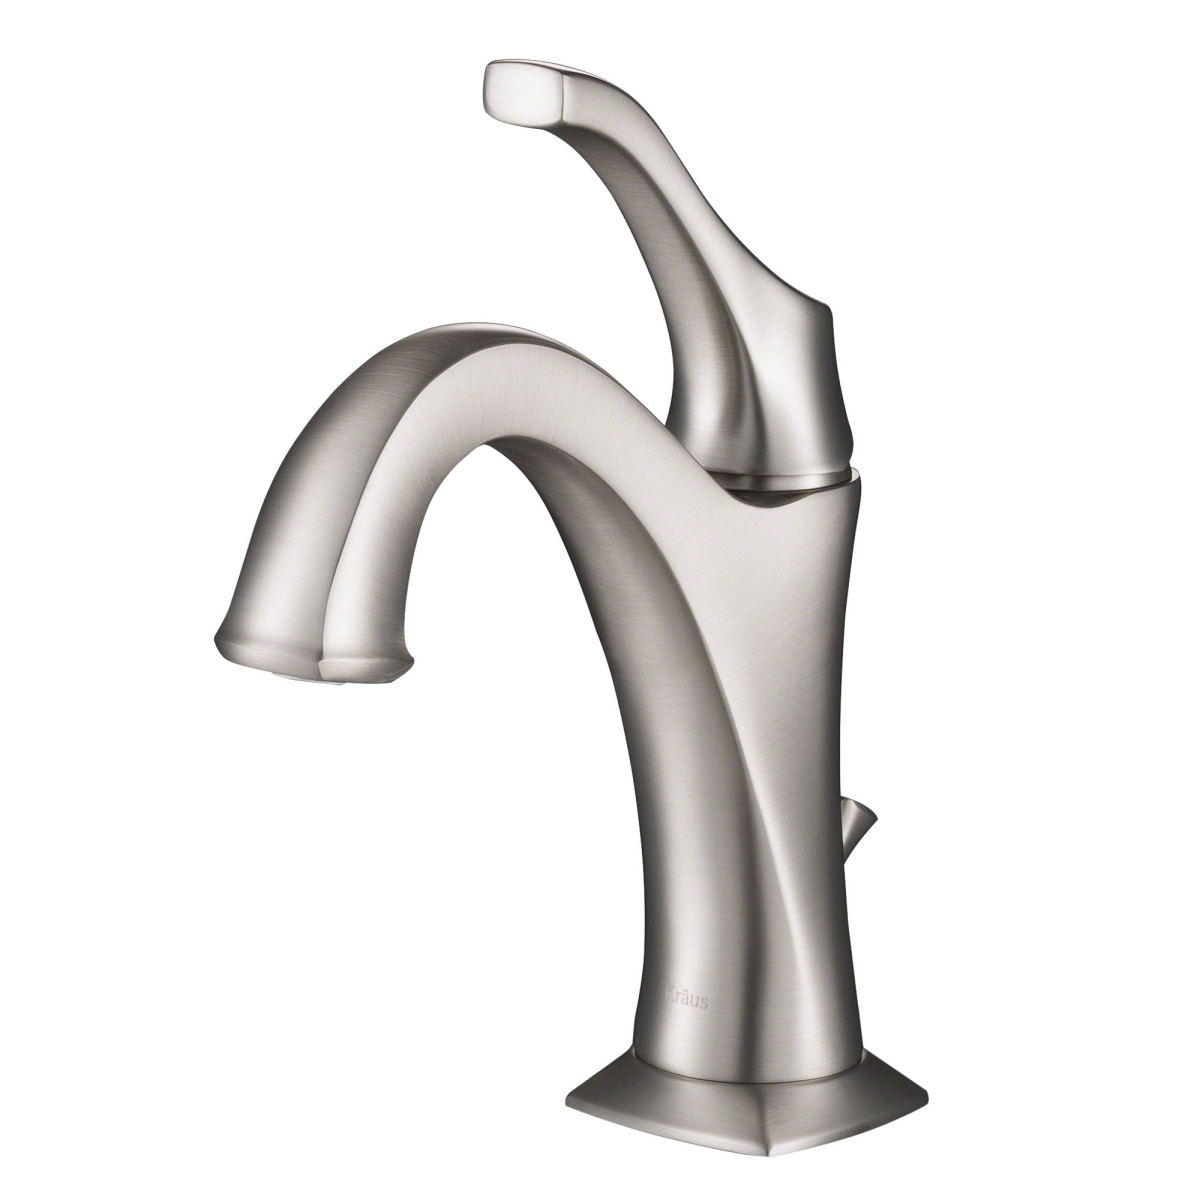 Kraus Usa Kbf-1201sfs Arlo Single H&le Basin Bathroom Faucet In All-brite Spot-free - Stainless Steel